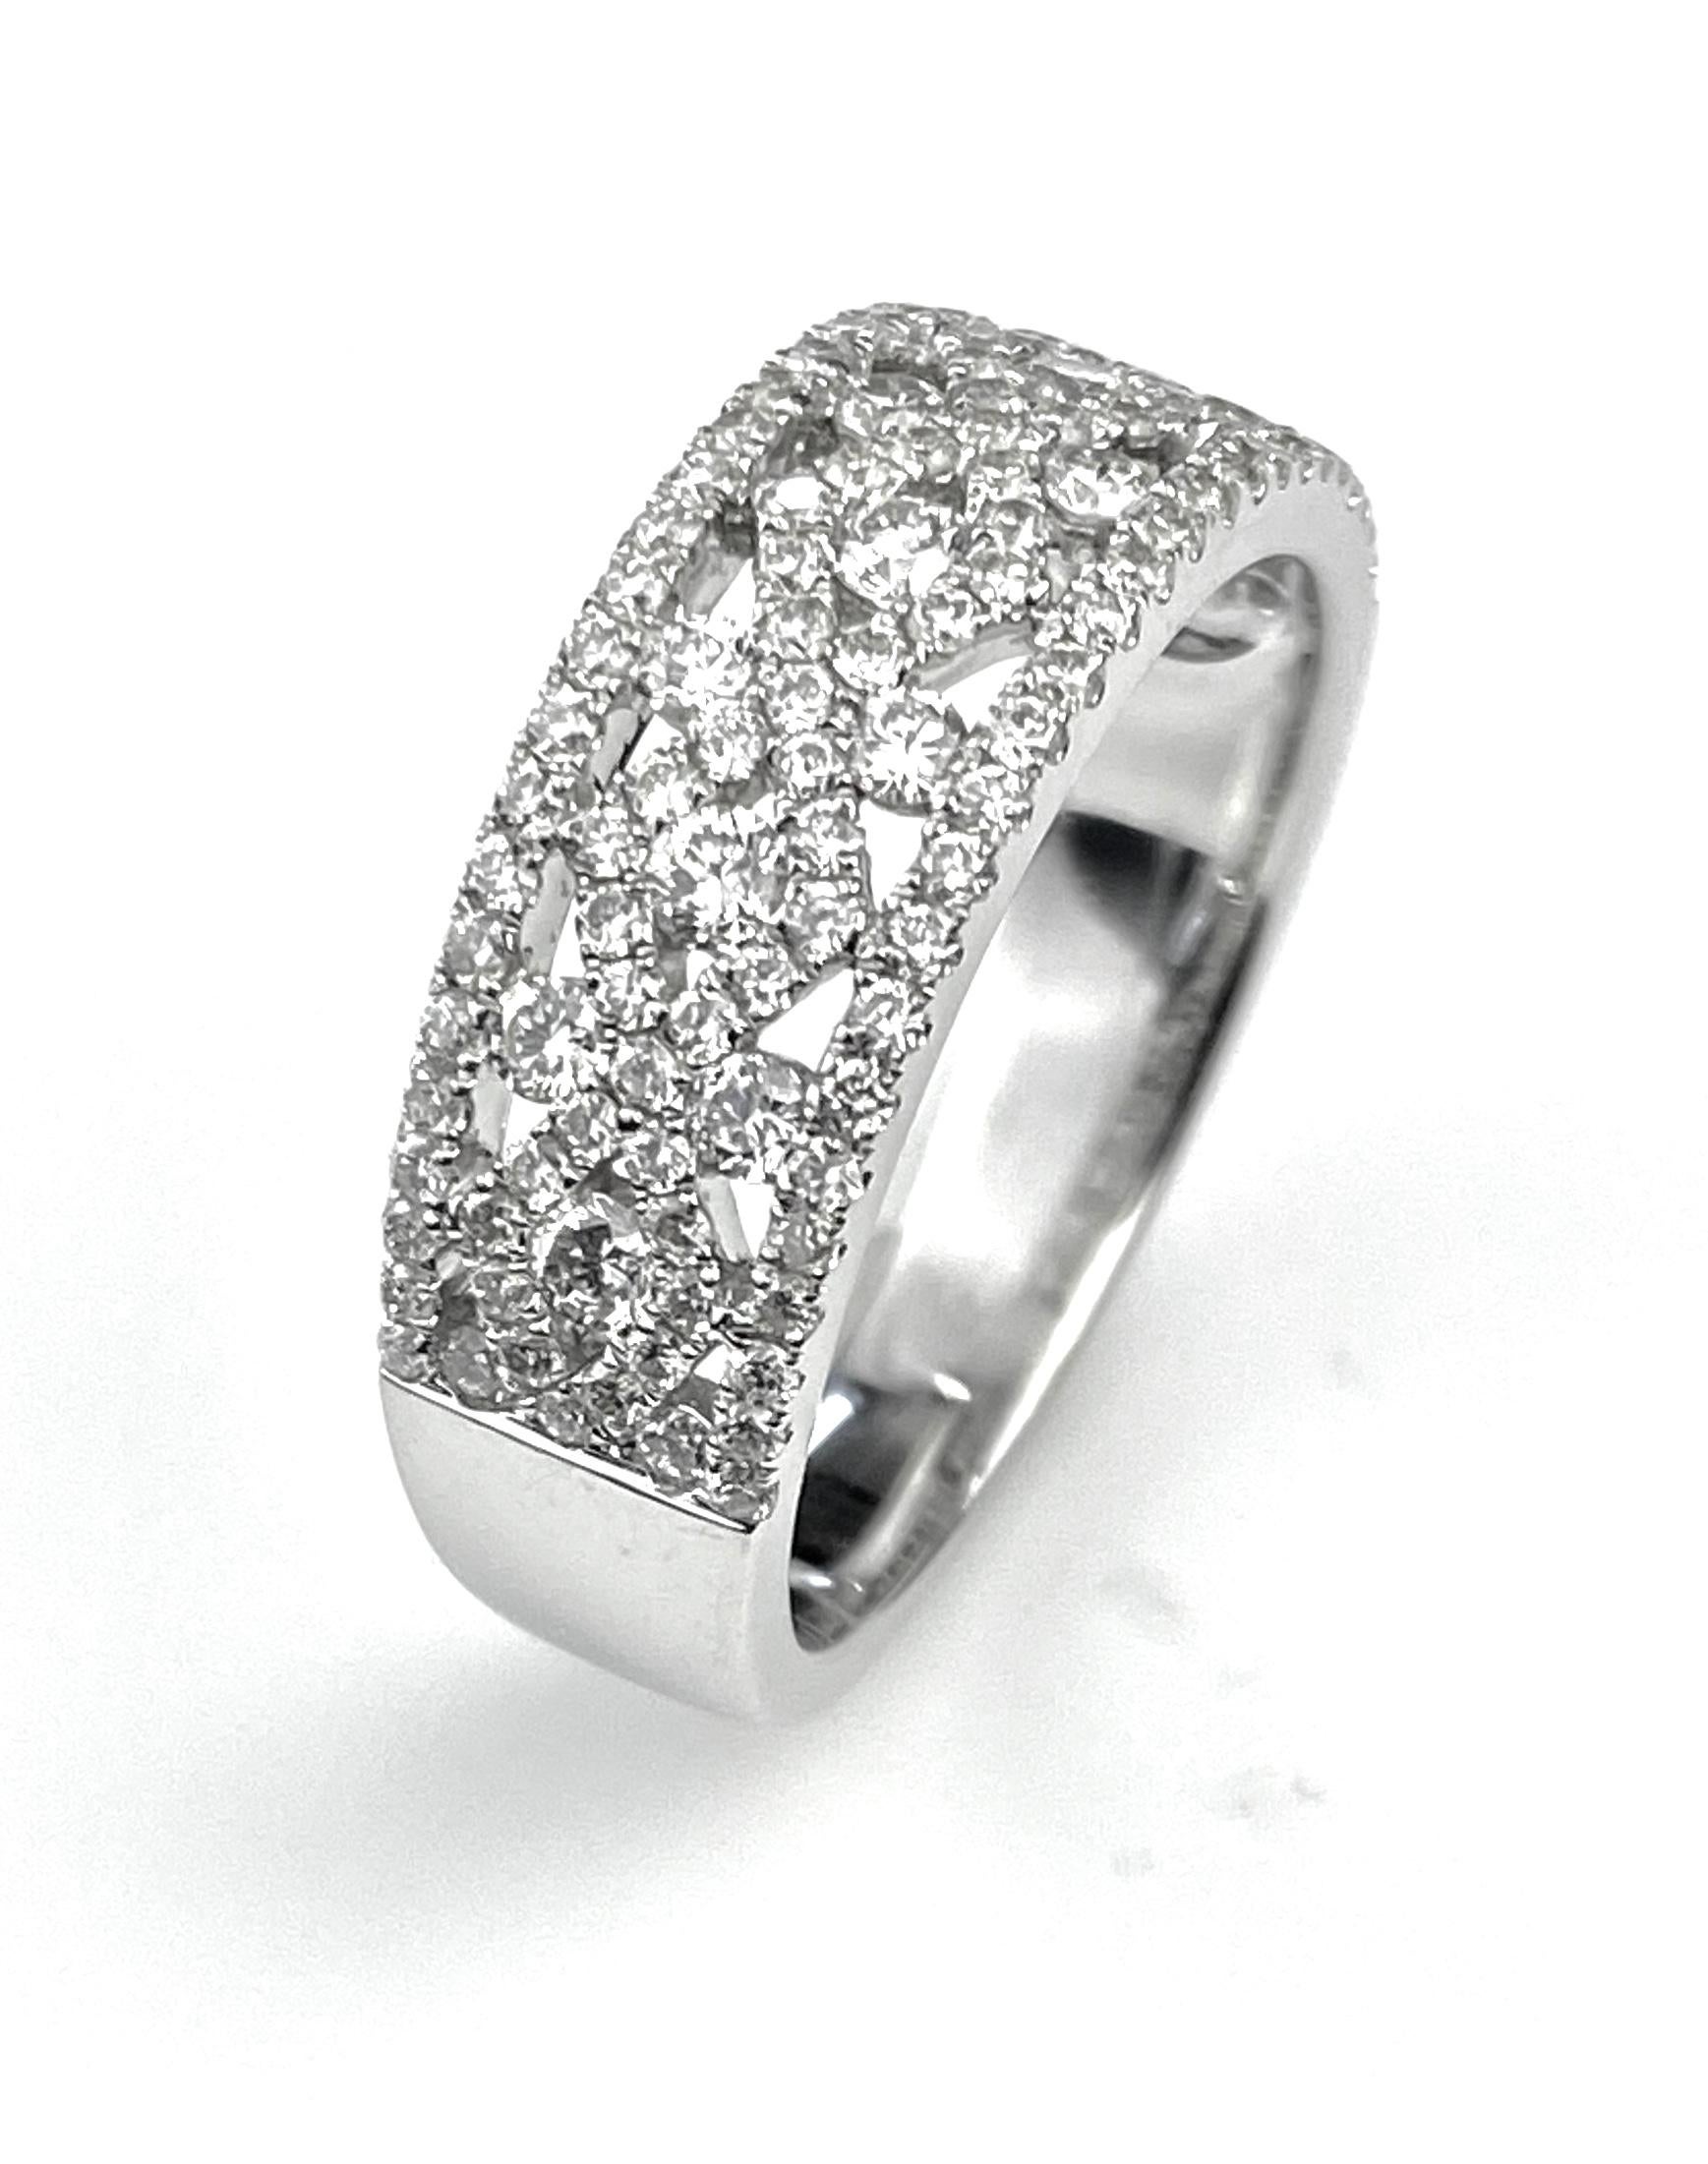 Diamond Right Hand Ring with Patterned Design In New Condition For Sale In Toronto, Ontario